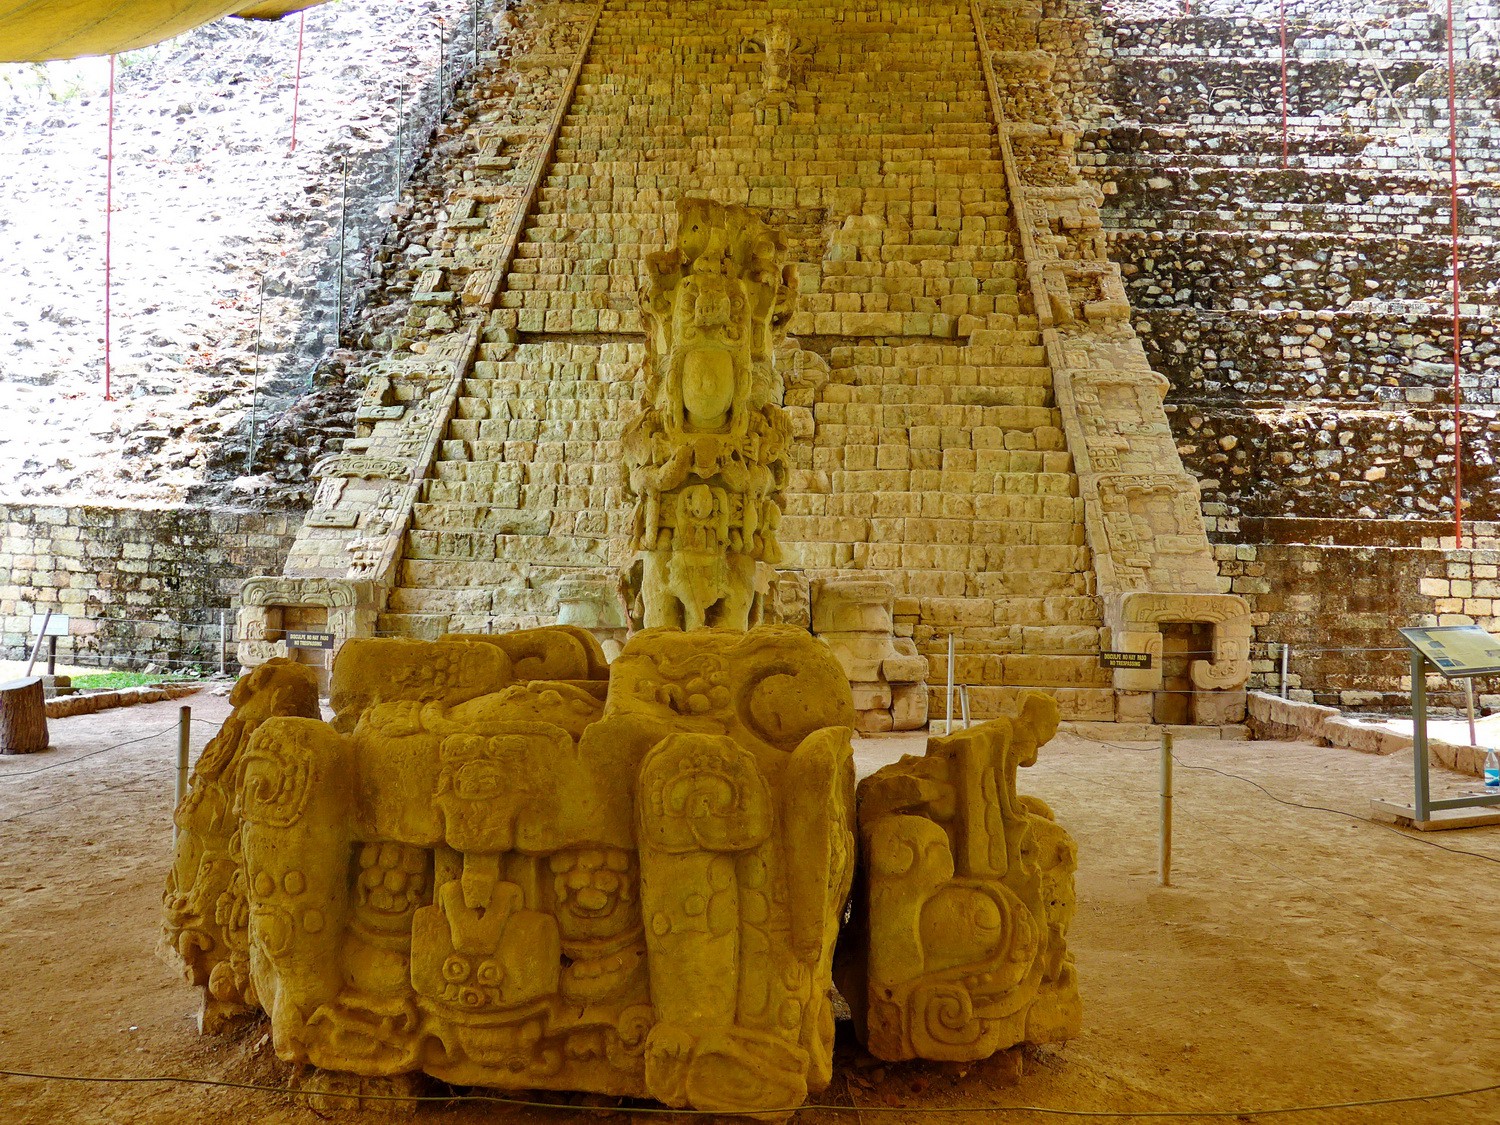 Stairs of hieroglyphs with 63 steps with several thousand scripts, the most famous building of Copan